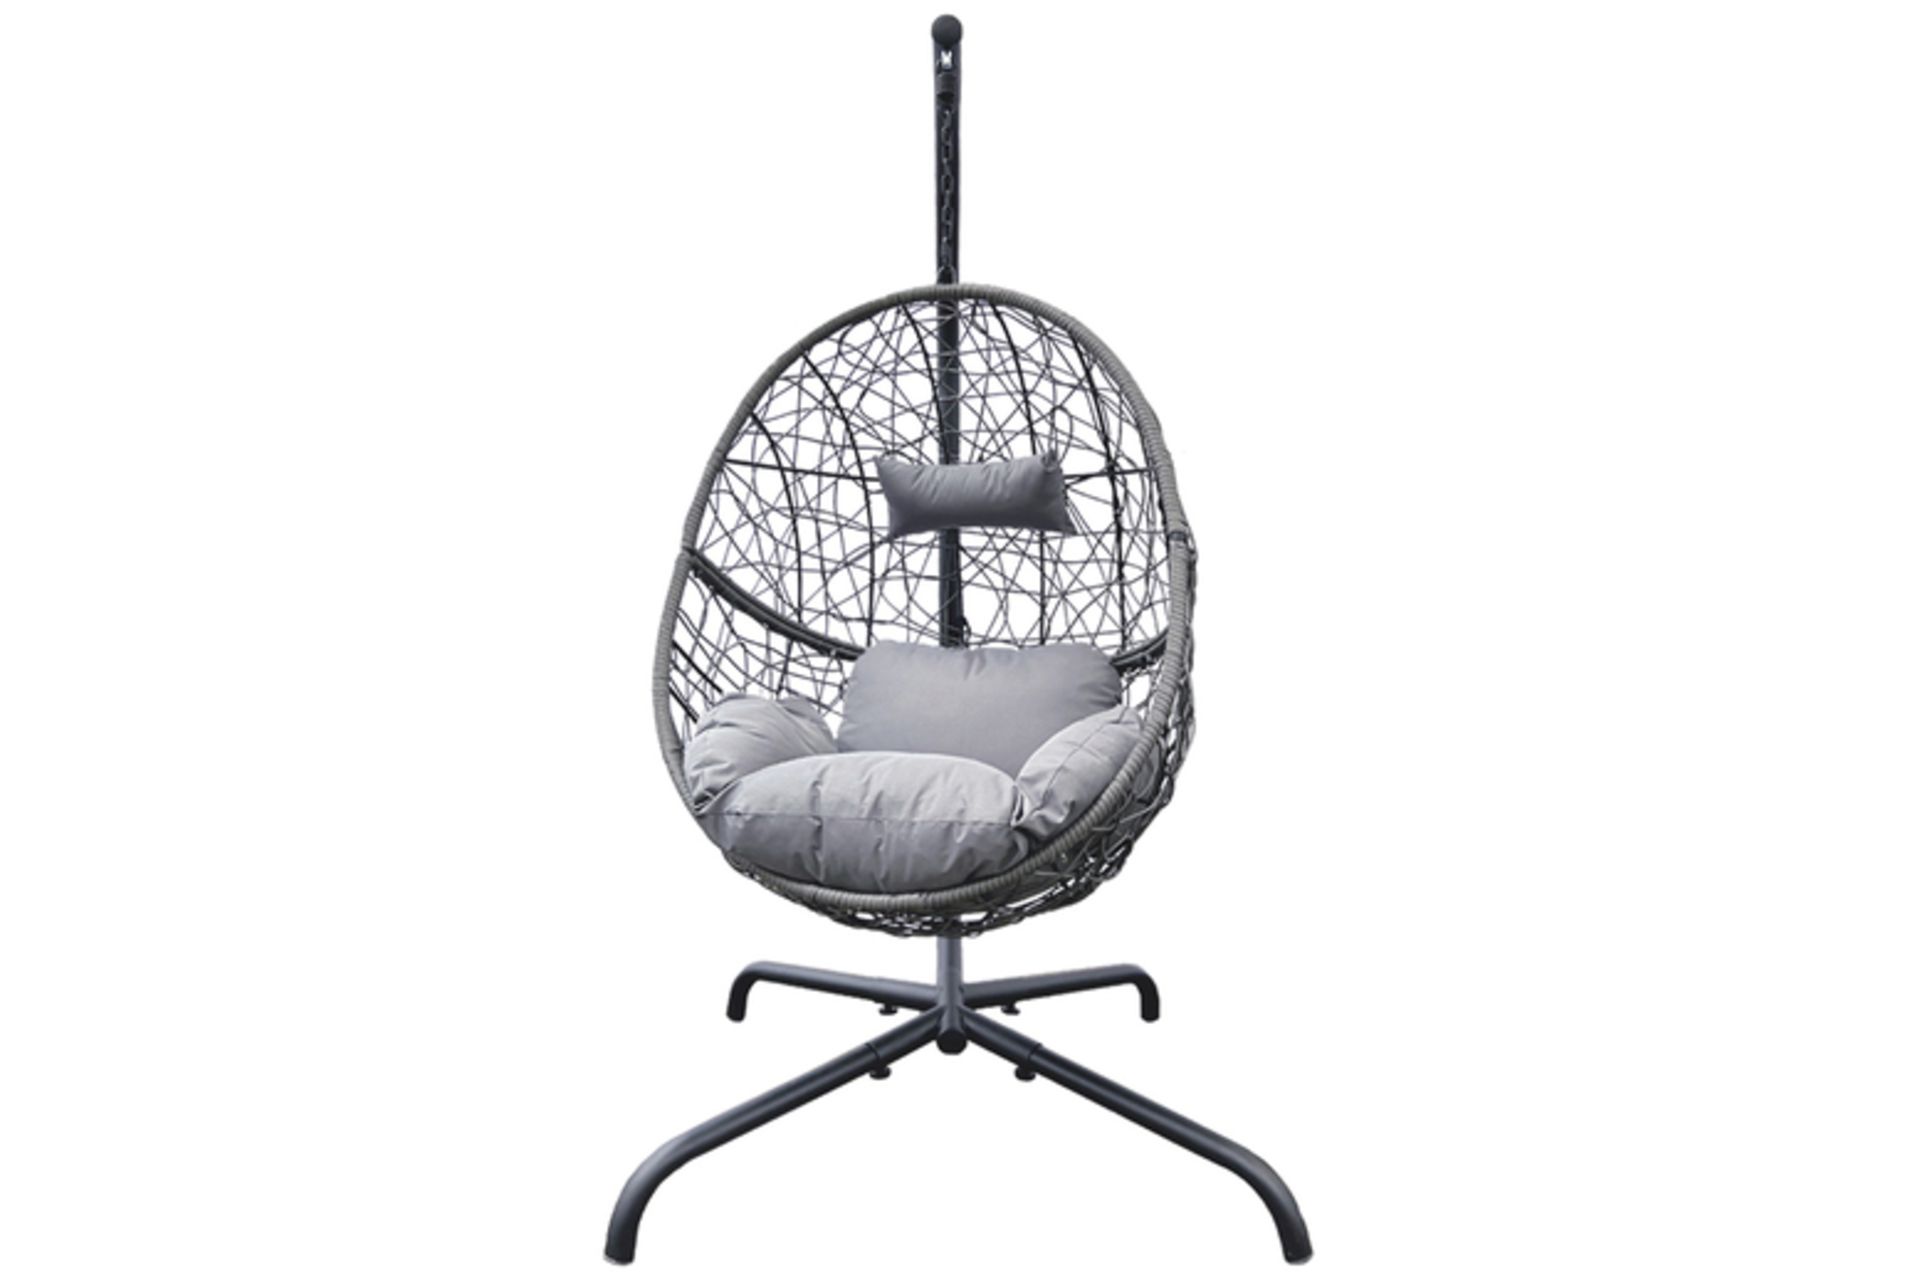 FREE DELIVERY - JOB LOT OF 5X HANGING EGG CHAIR WITH A CUSHION AND PILLOW - GREY - Image 2 of 3